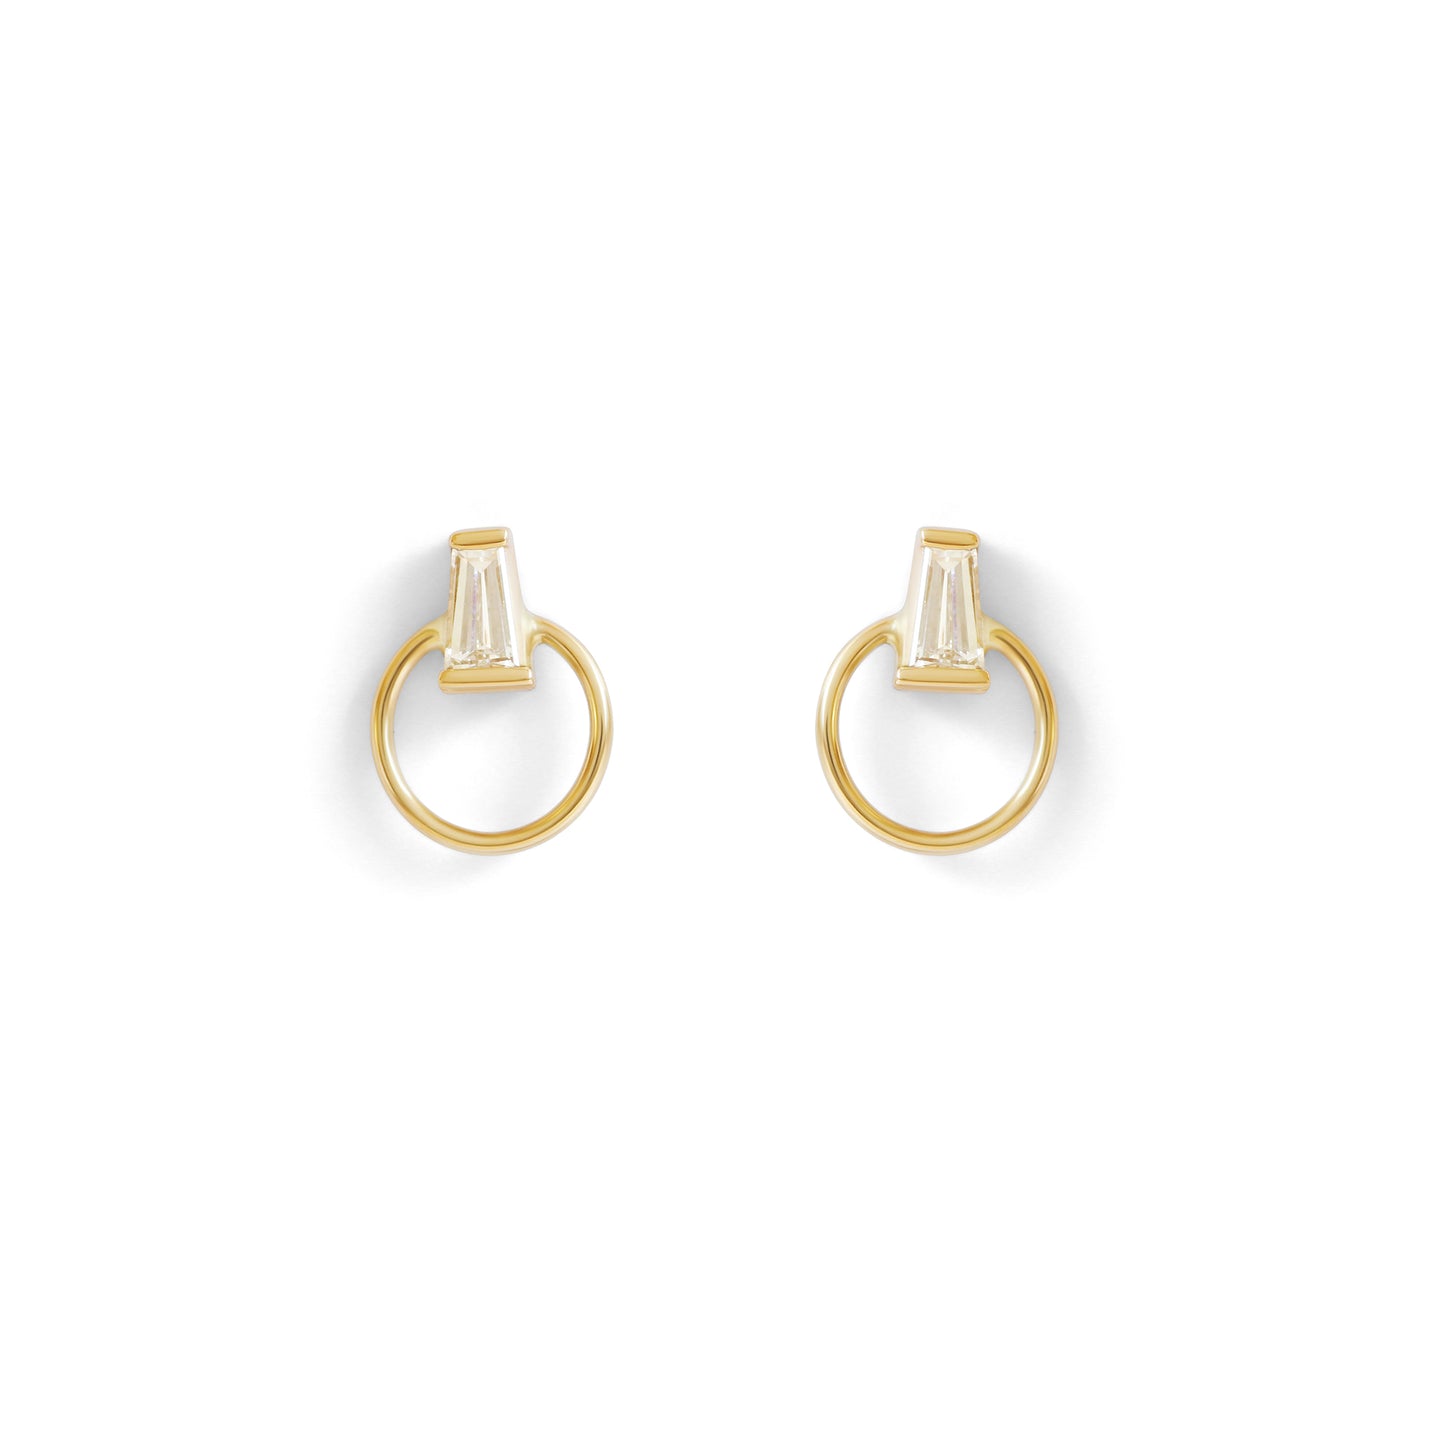 Aton Earring / Lab Tapered Baguette Diamond - Goldpoint Studio - Greenpoint, Brooklyn - Fine Jewelry